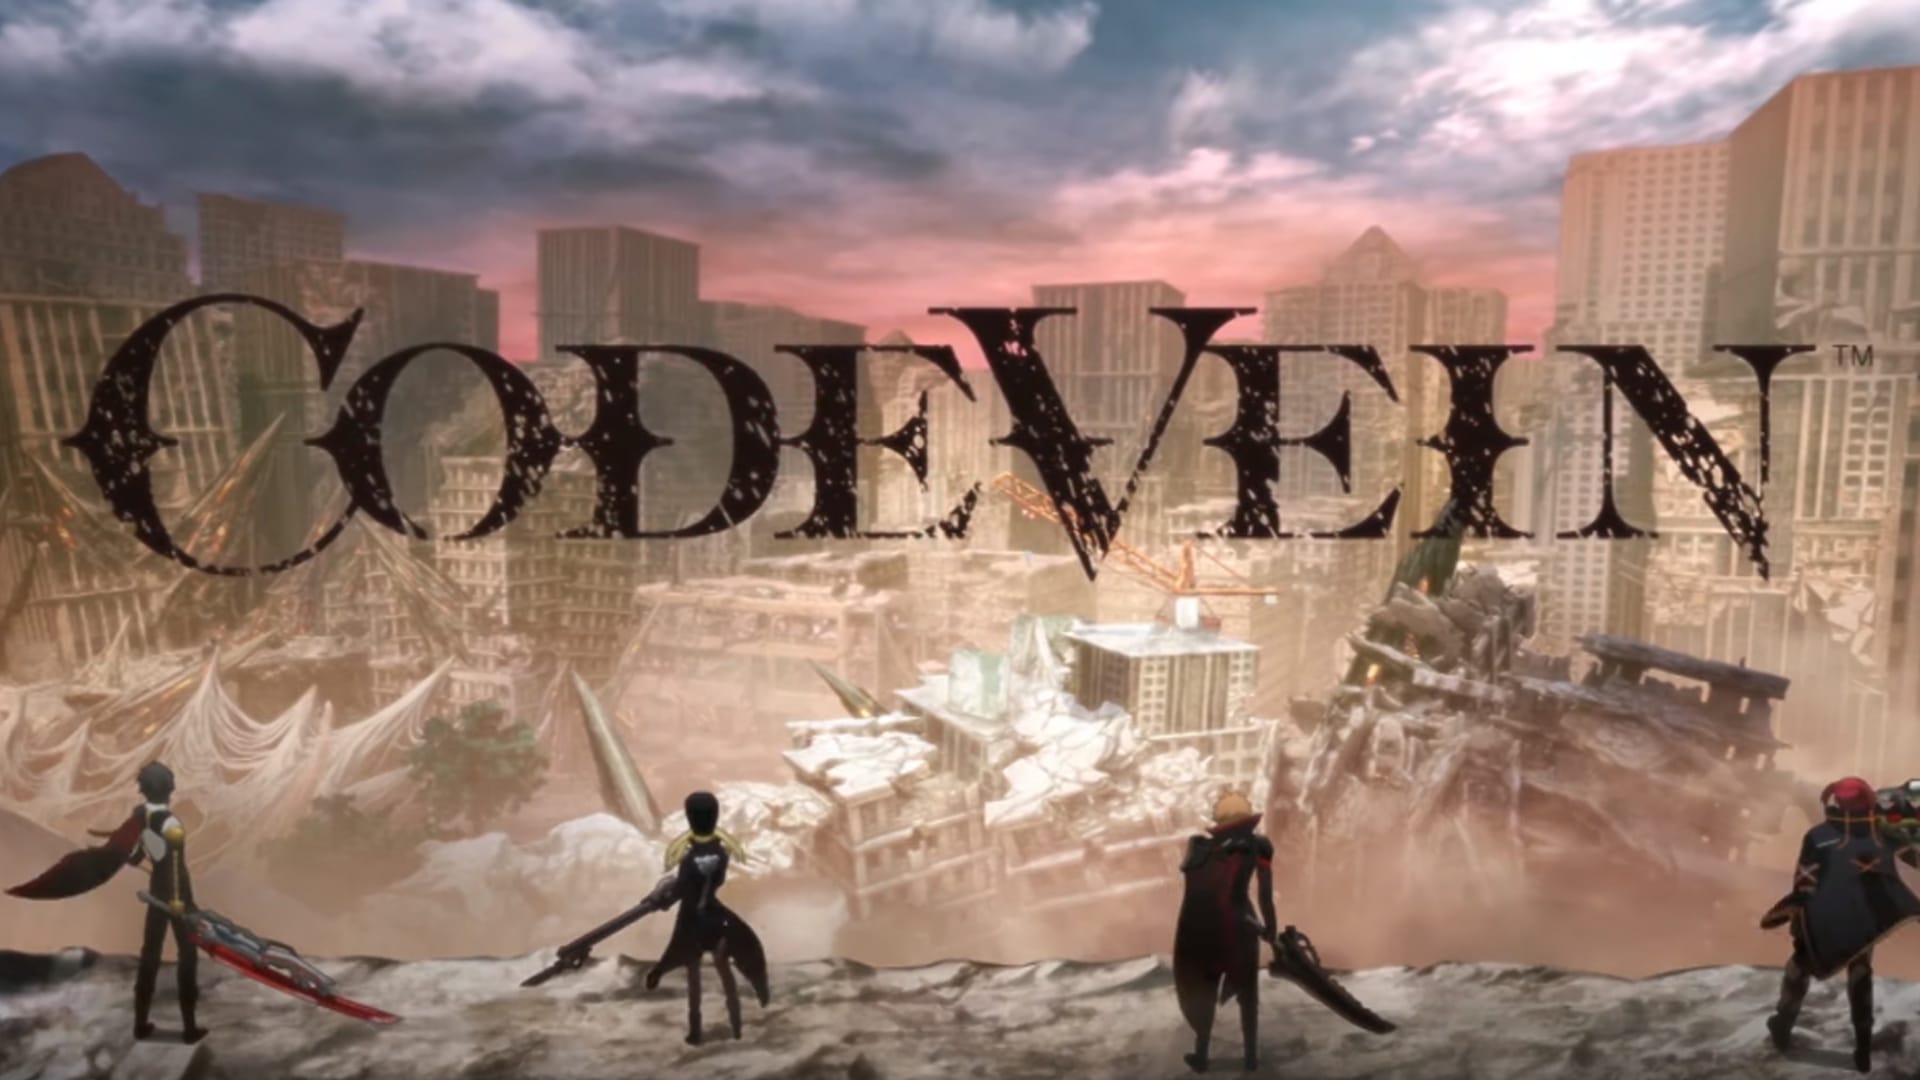 Code Vein Trailer Introduces The Butterfly of Delerium Boss